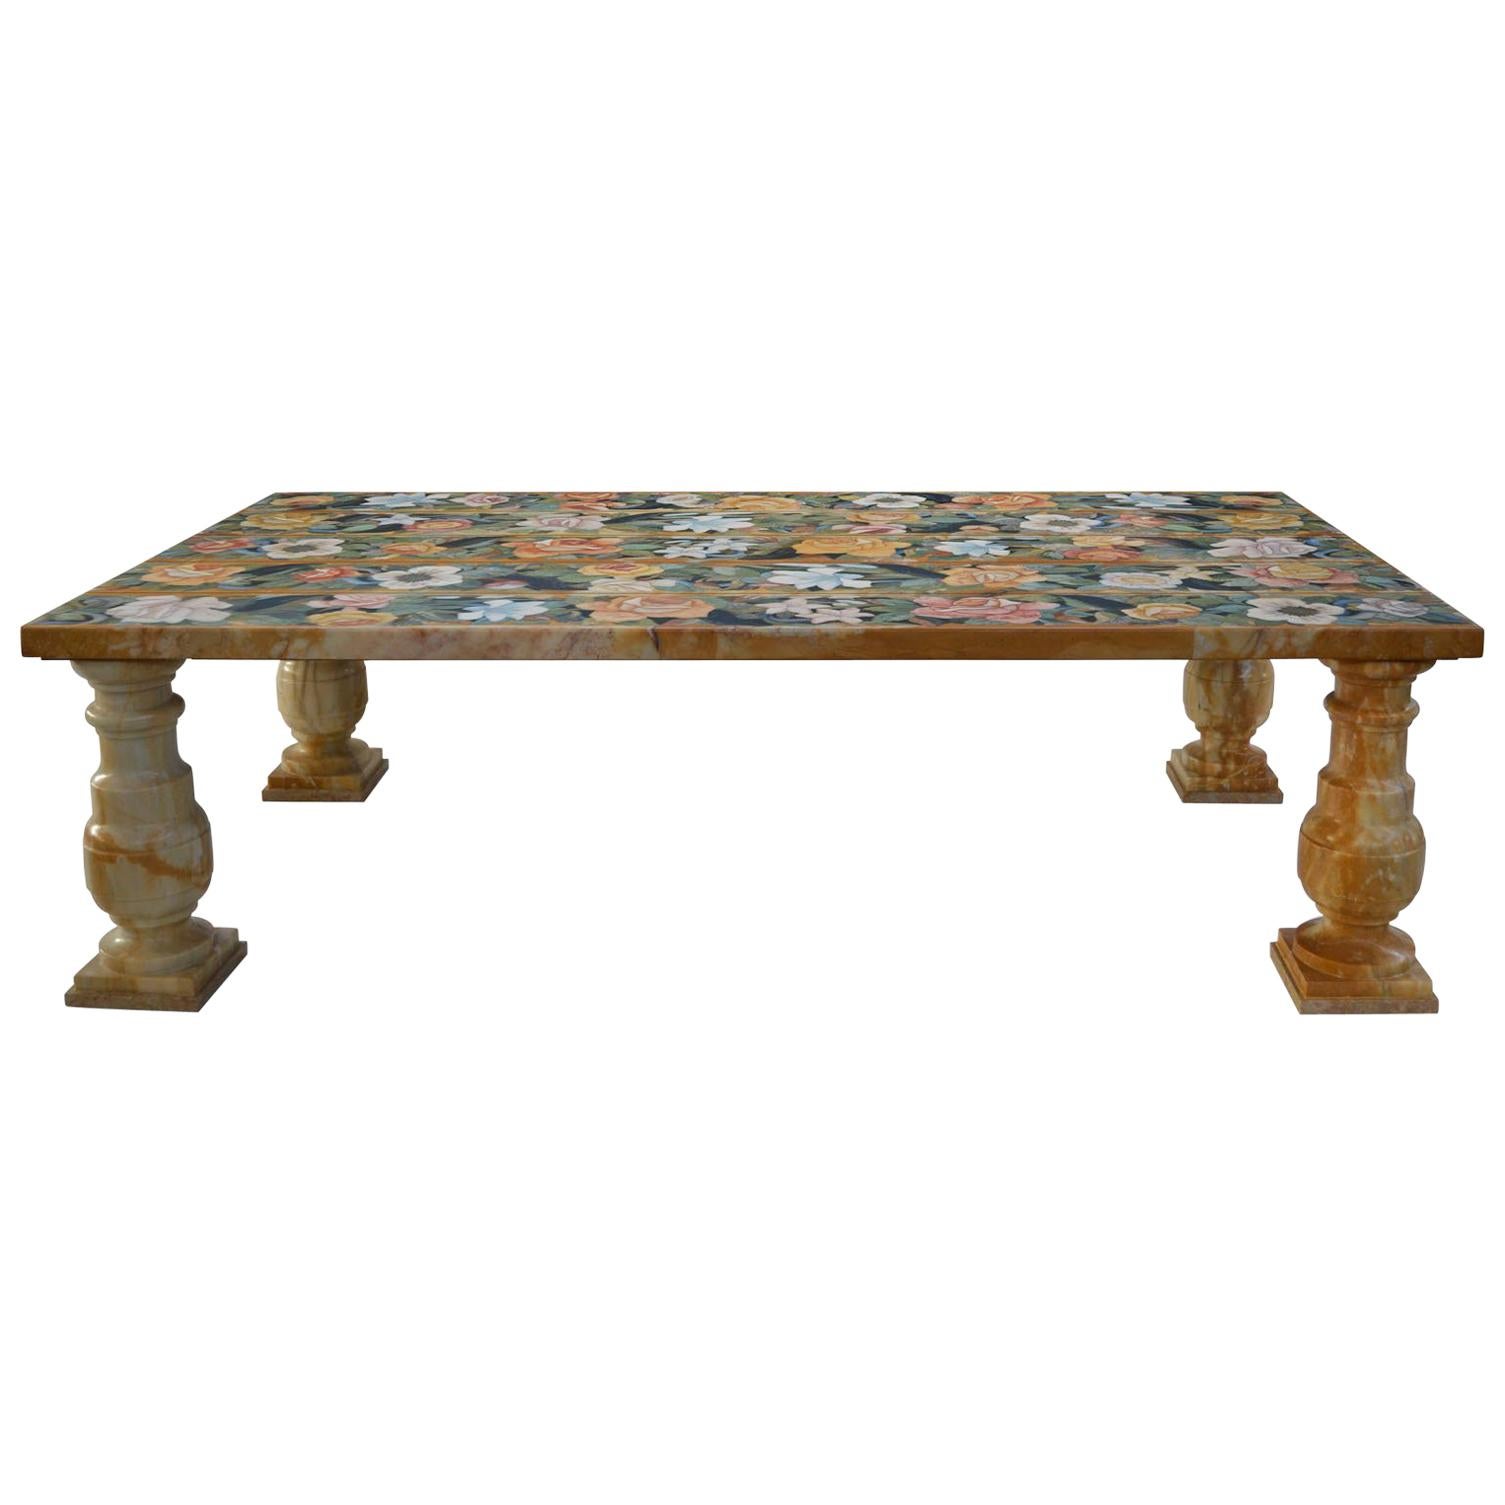 Coffee Table Yellow Siena marble Scagliola Art Inlay Decoration Four marble legs